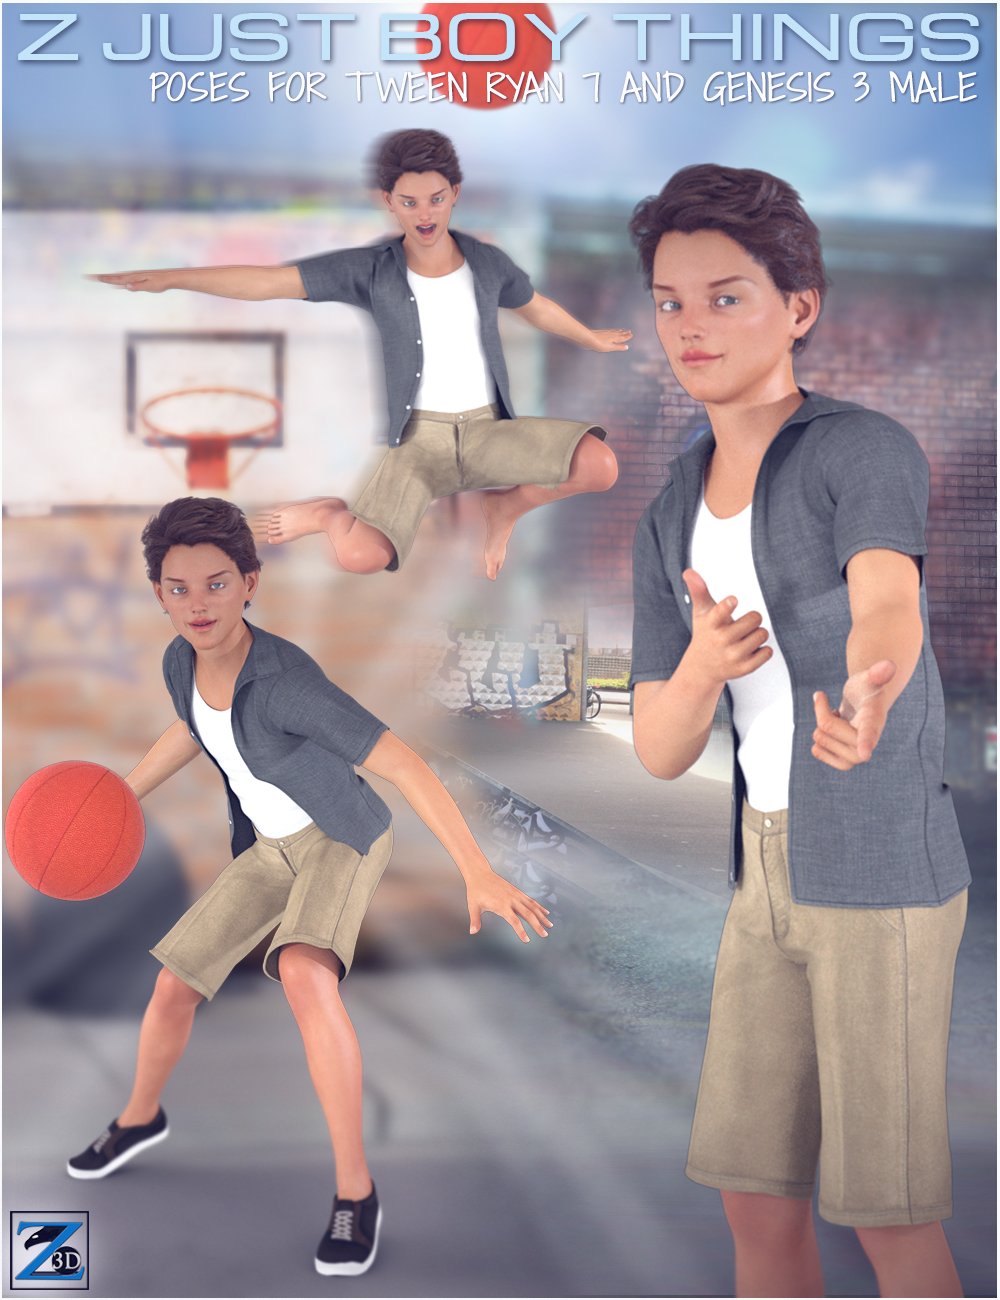 Z Just Boy Things - Poses for Tween Ryan 7 and Genesis 3 Male by: Zeddicuss, 3D Models by Daz 3D